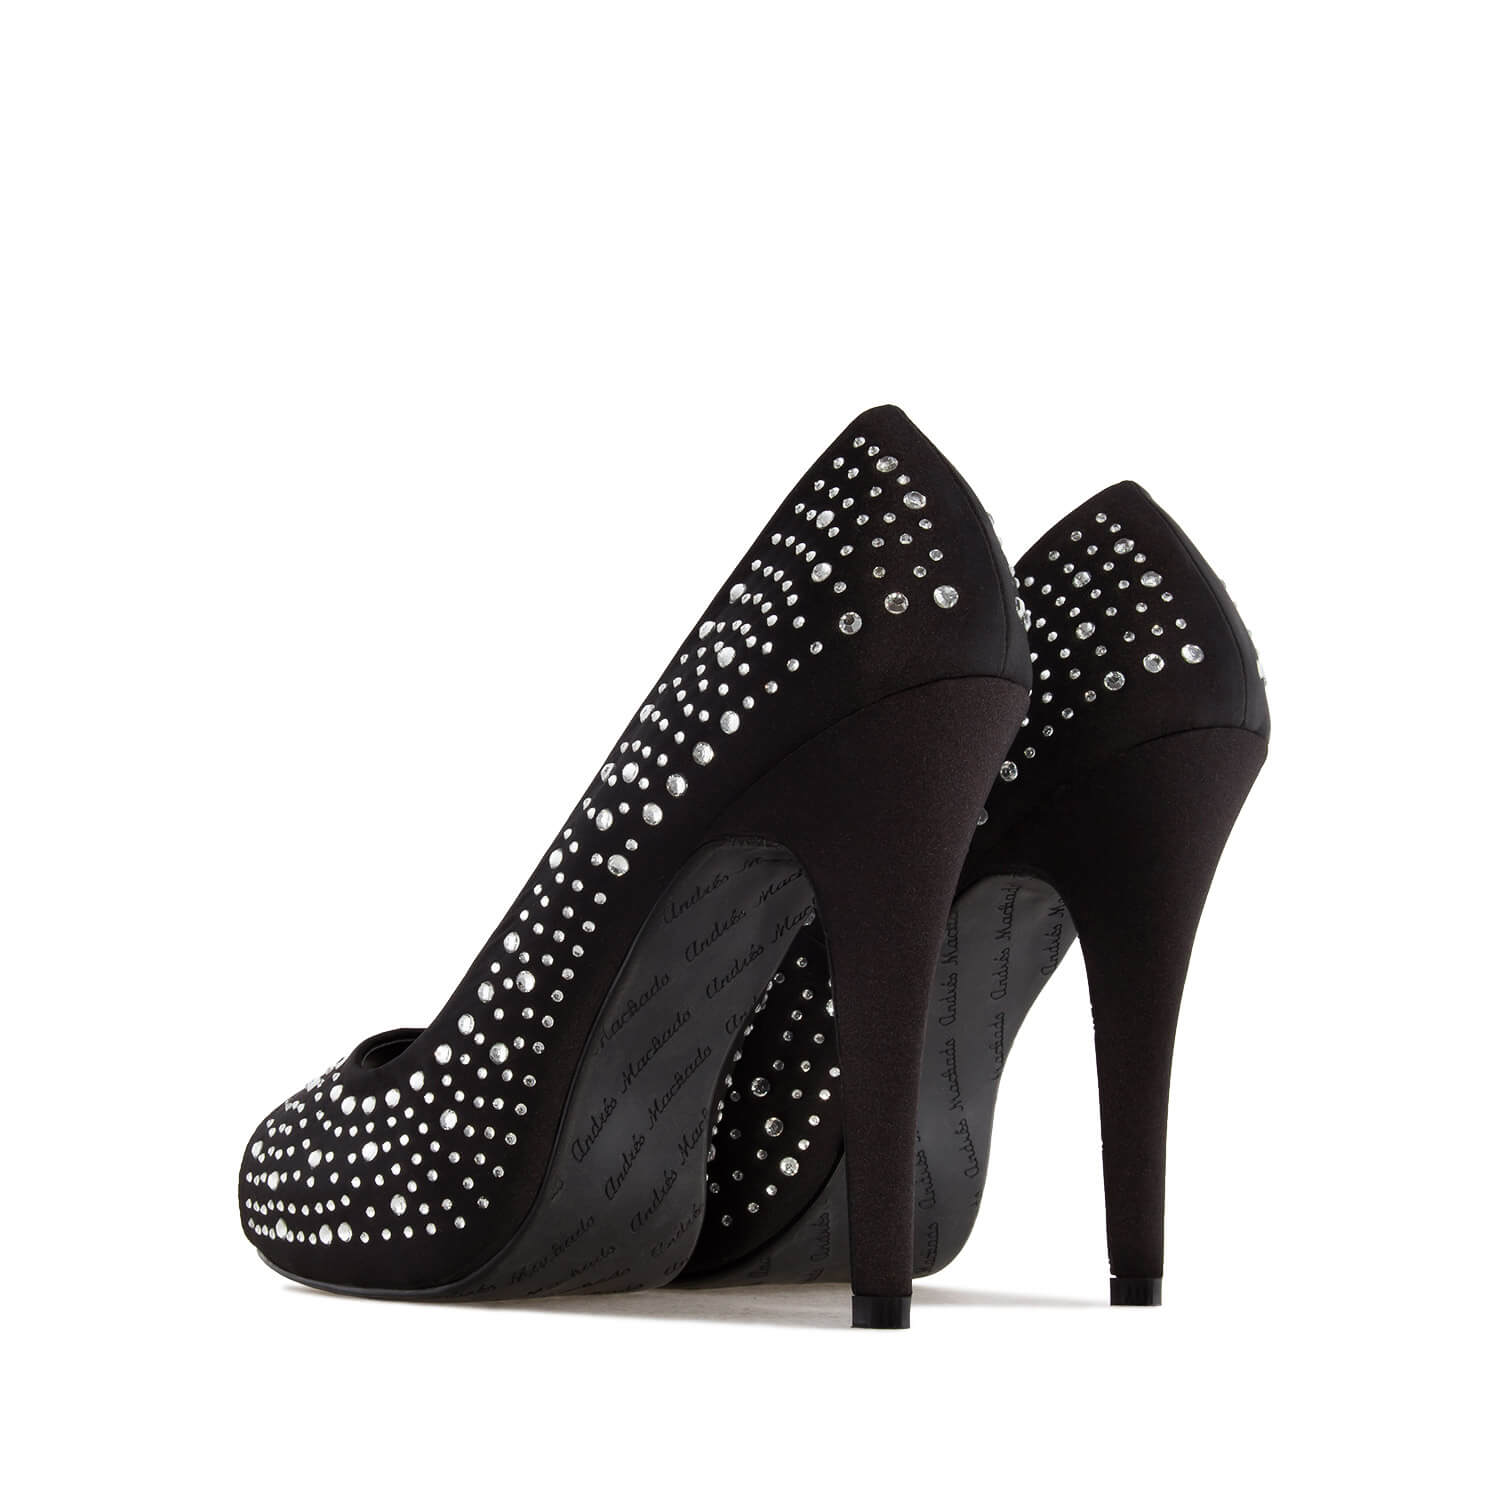 Sophisticated Peep Toe Pumps in Black Satin with Strass 